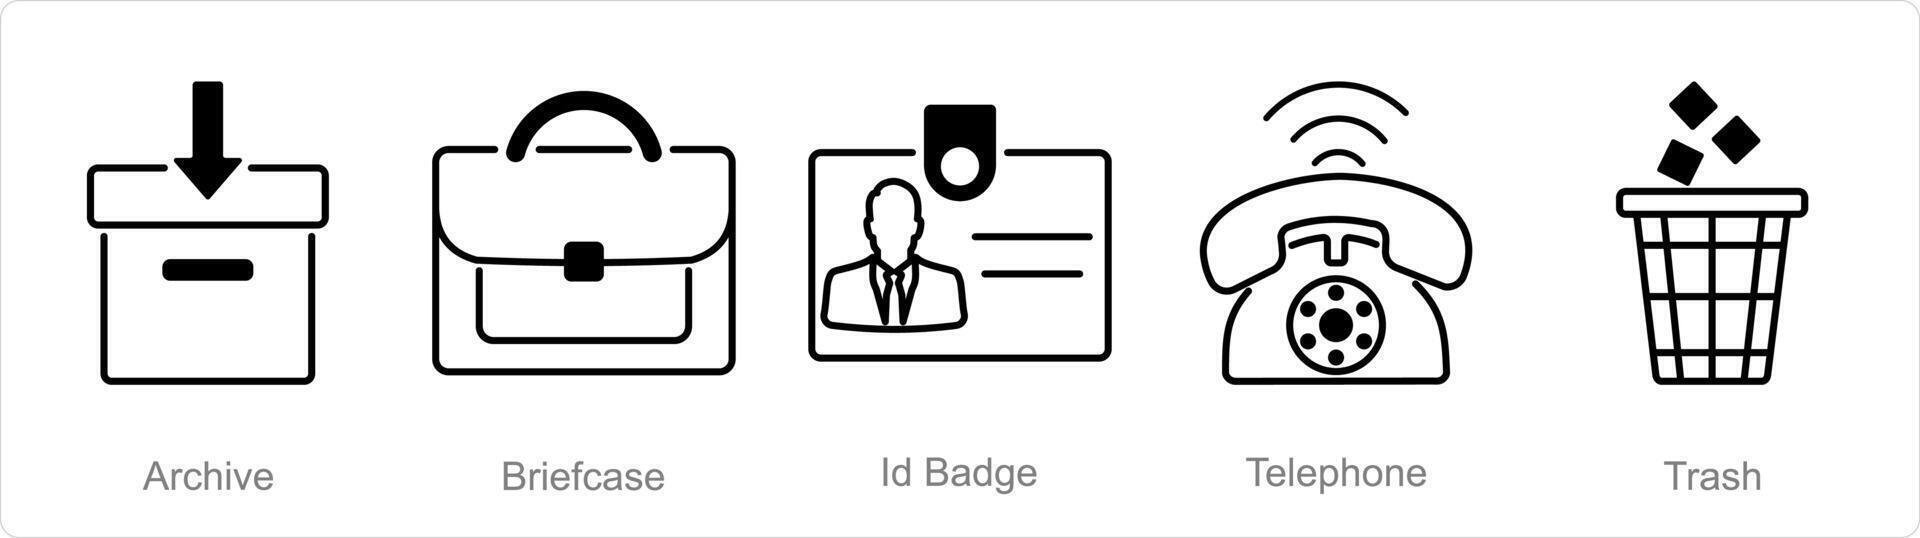 A set of 5 Office icons as archive, briefcase, id badge vector